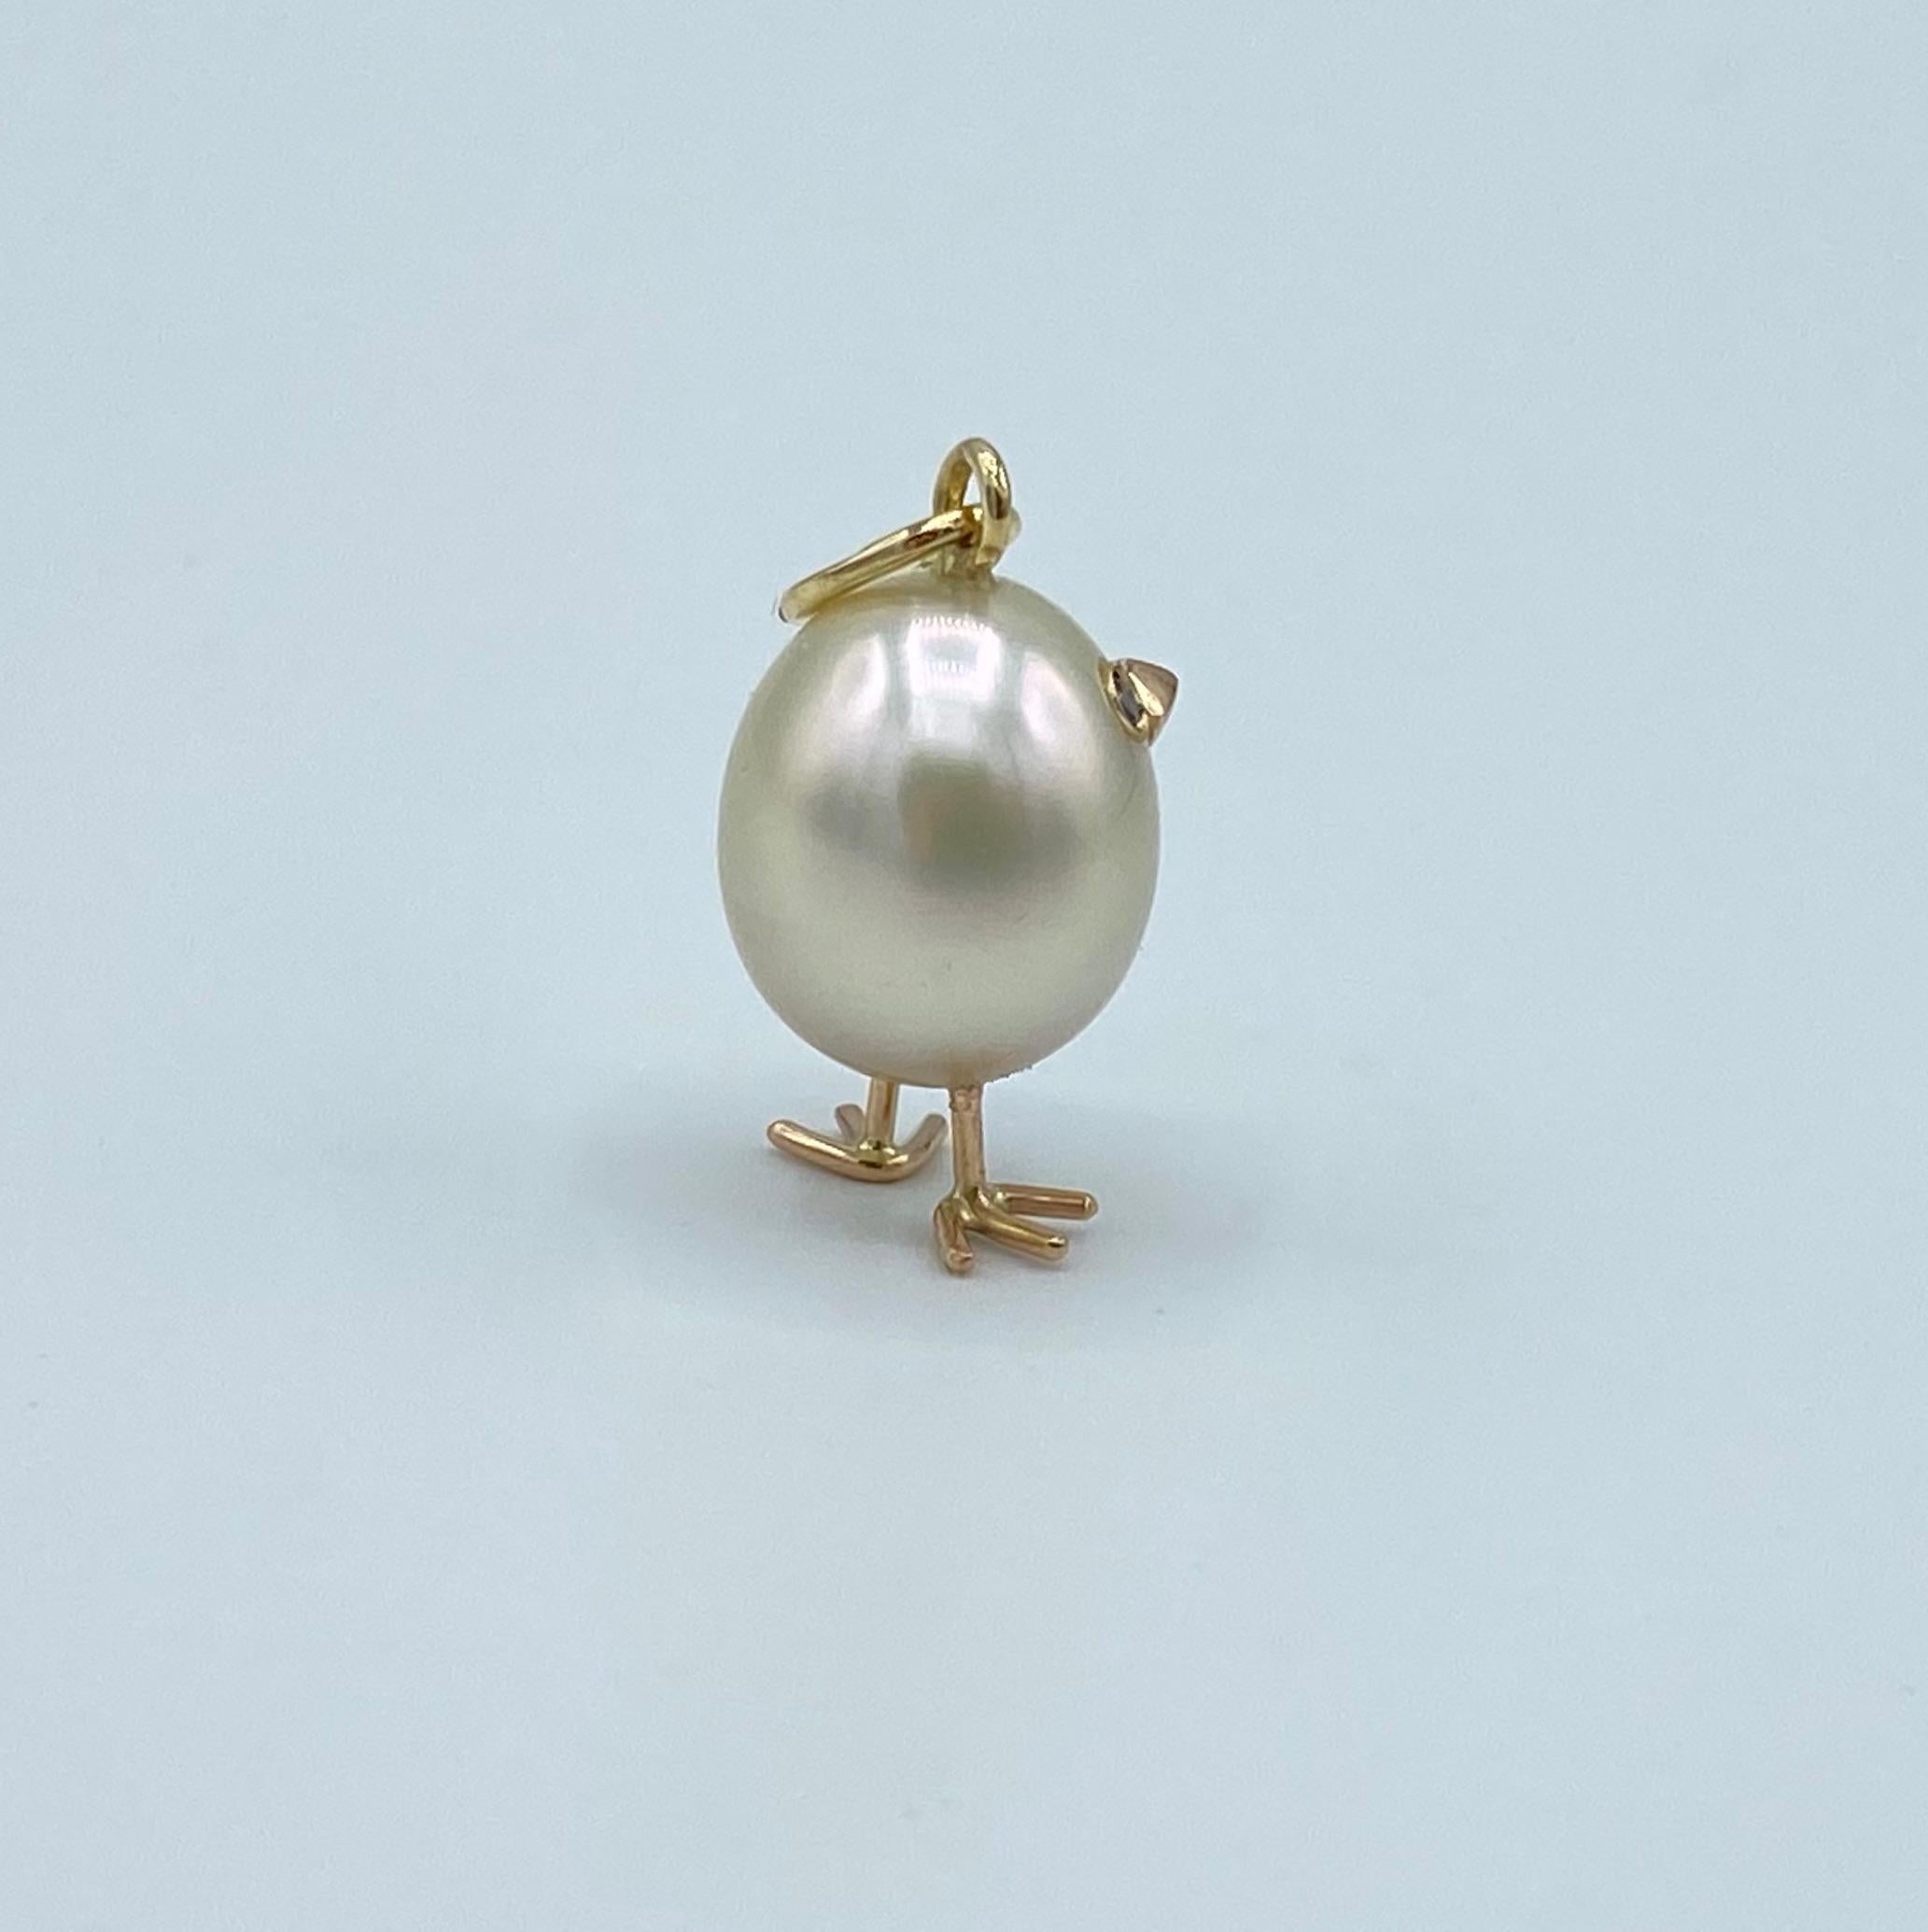 Chick Australian Pearl Diamond Yellow Red white 18 Kt Gold Pendant or Necklace
A oval shape Australian pearl has been carefully crafted to make a chick. He has his two legs, two eyes encrusted with two black diamonds and his beak. 
The gold is red